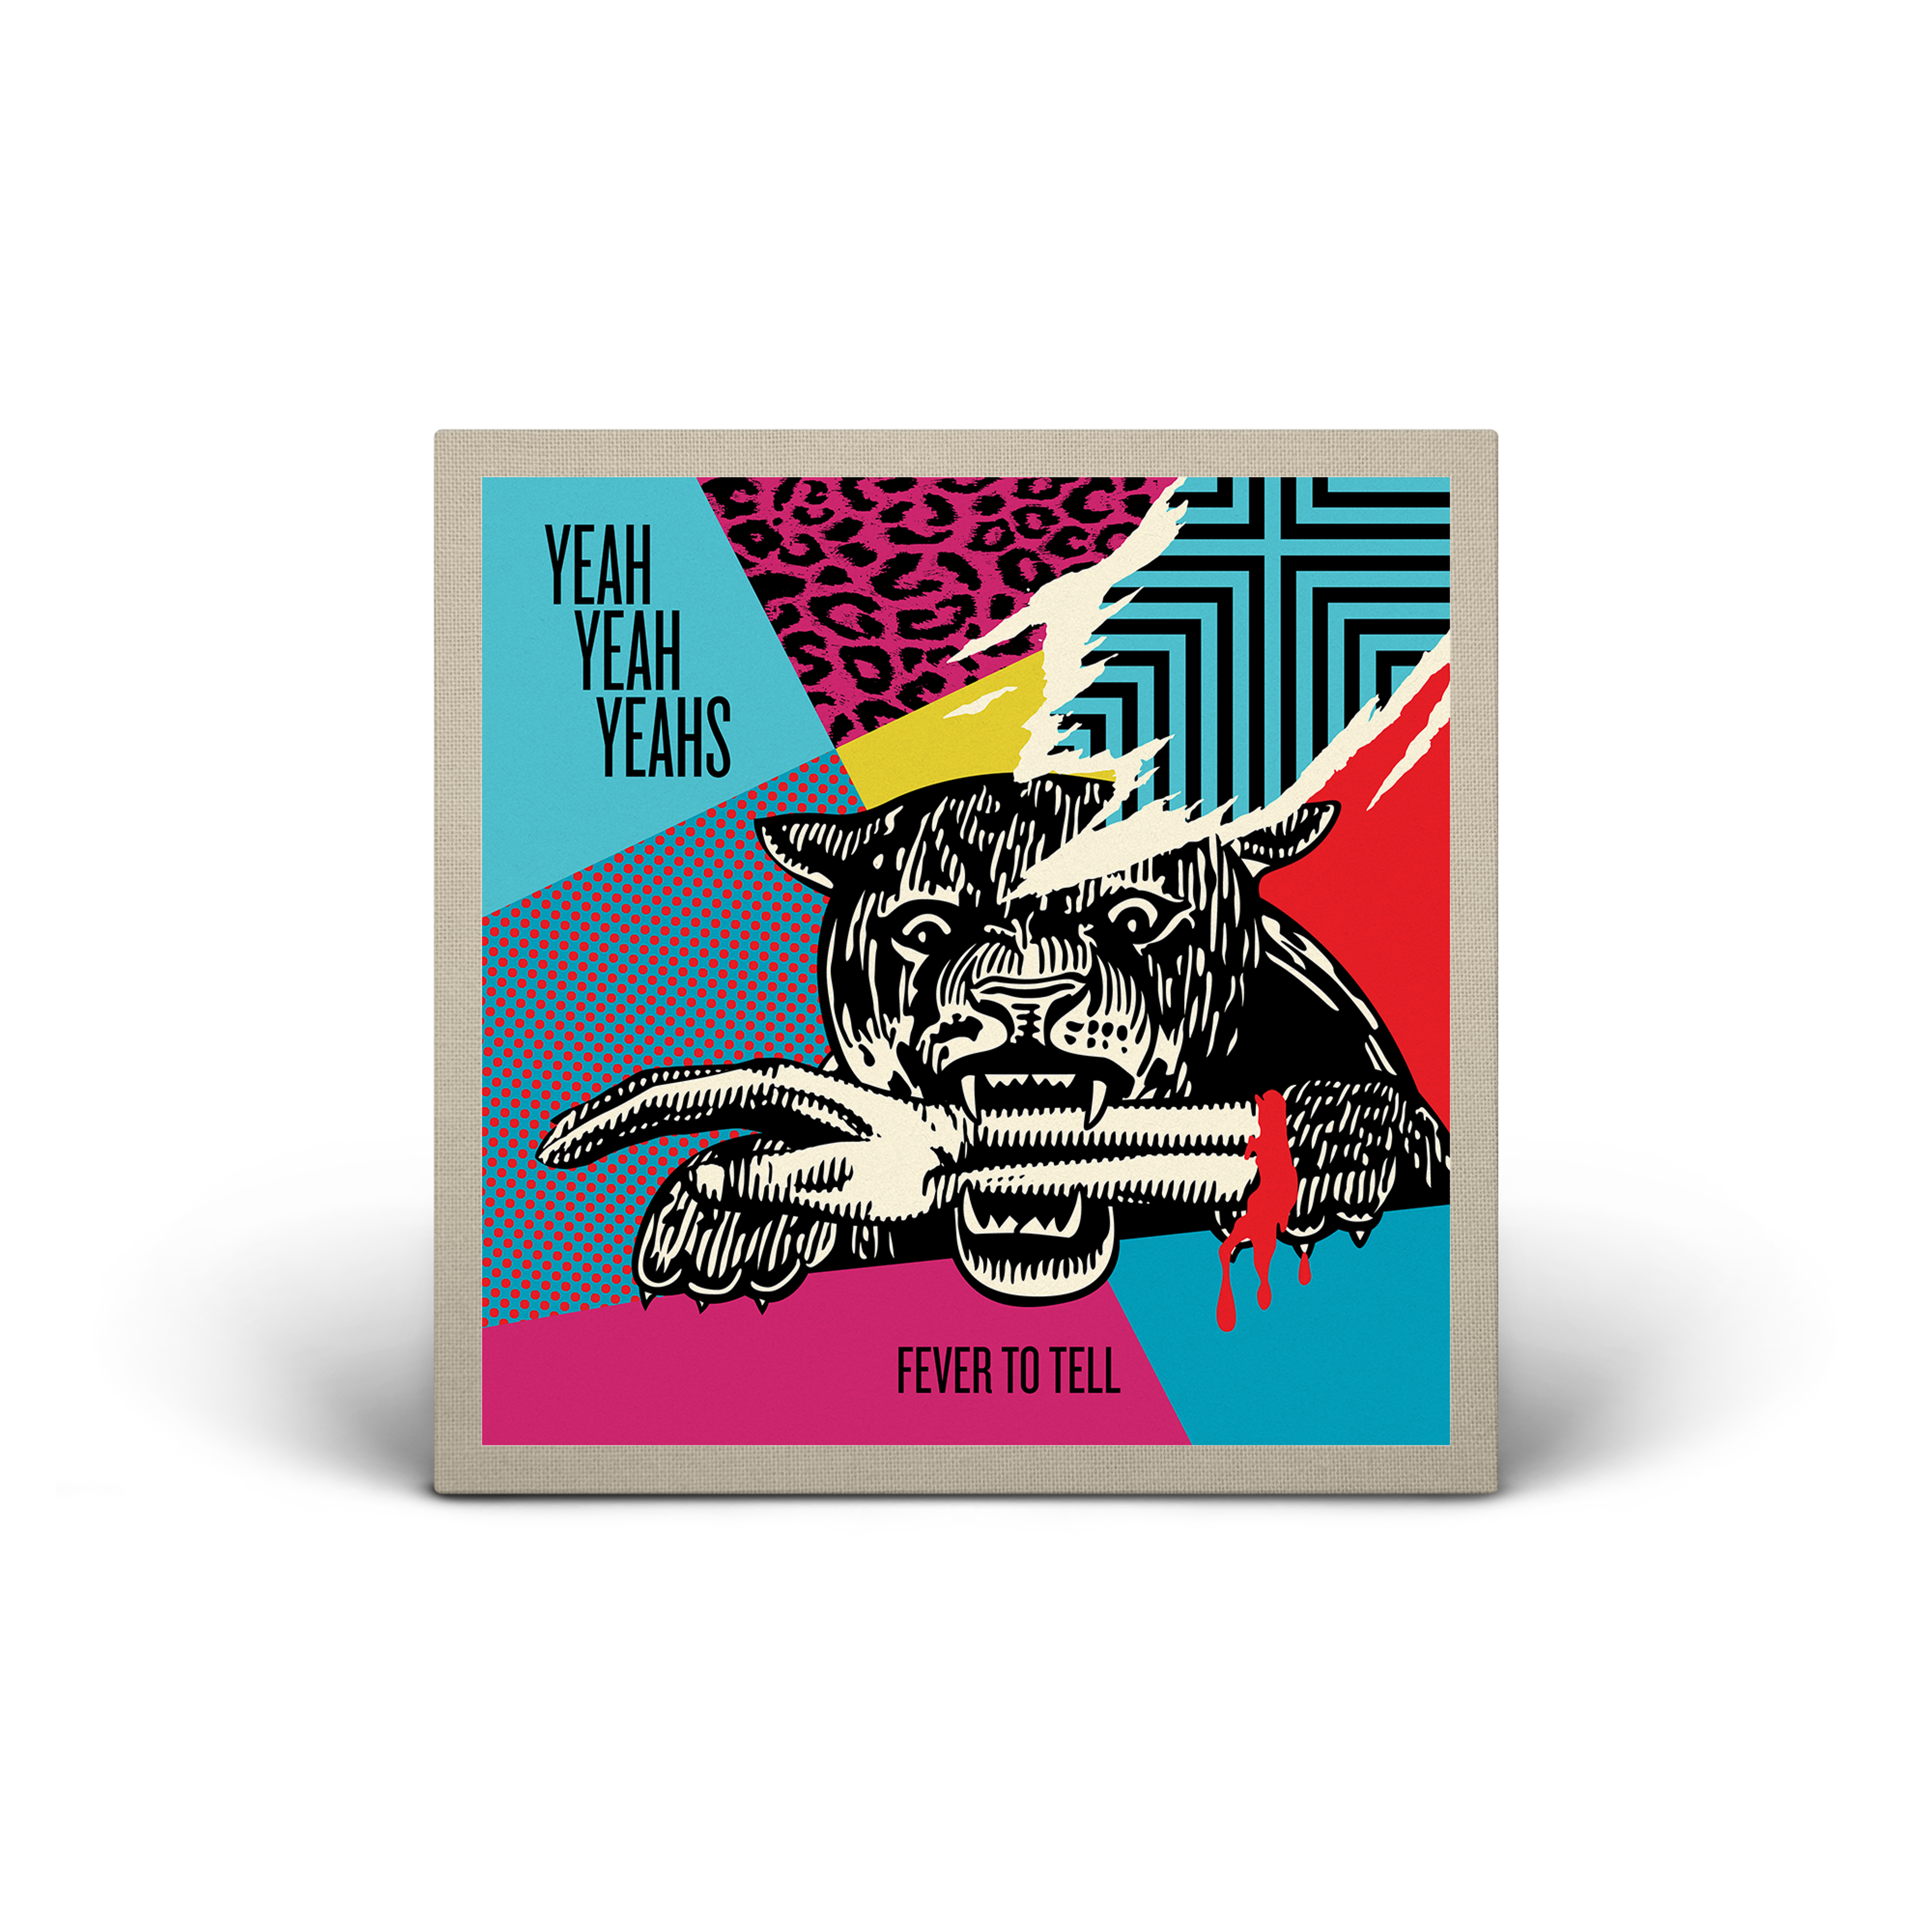 Alternate View 1 of Yeah Yeah Yeahs - Fever to Tell by Shepard Fairey Gallery Vinyl